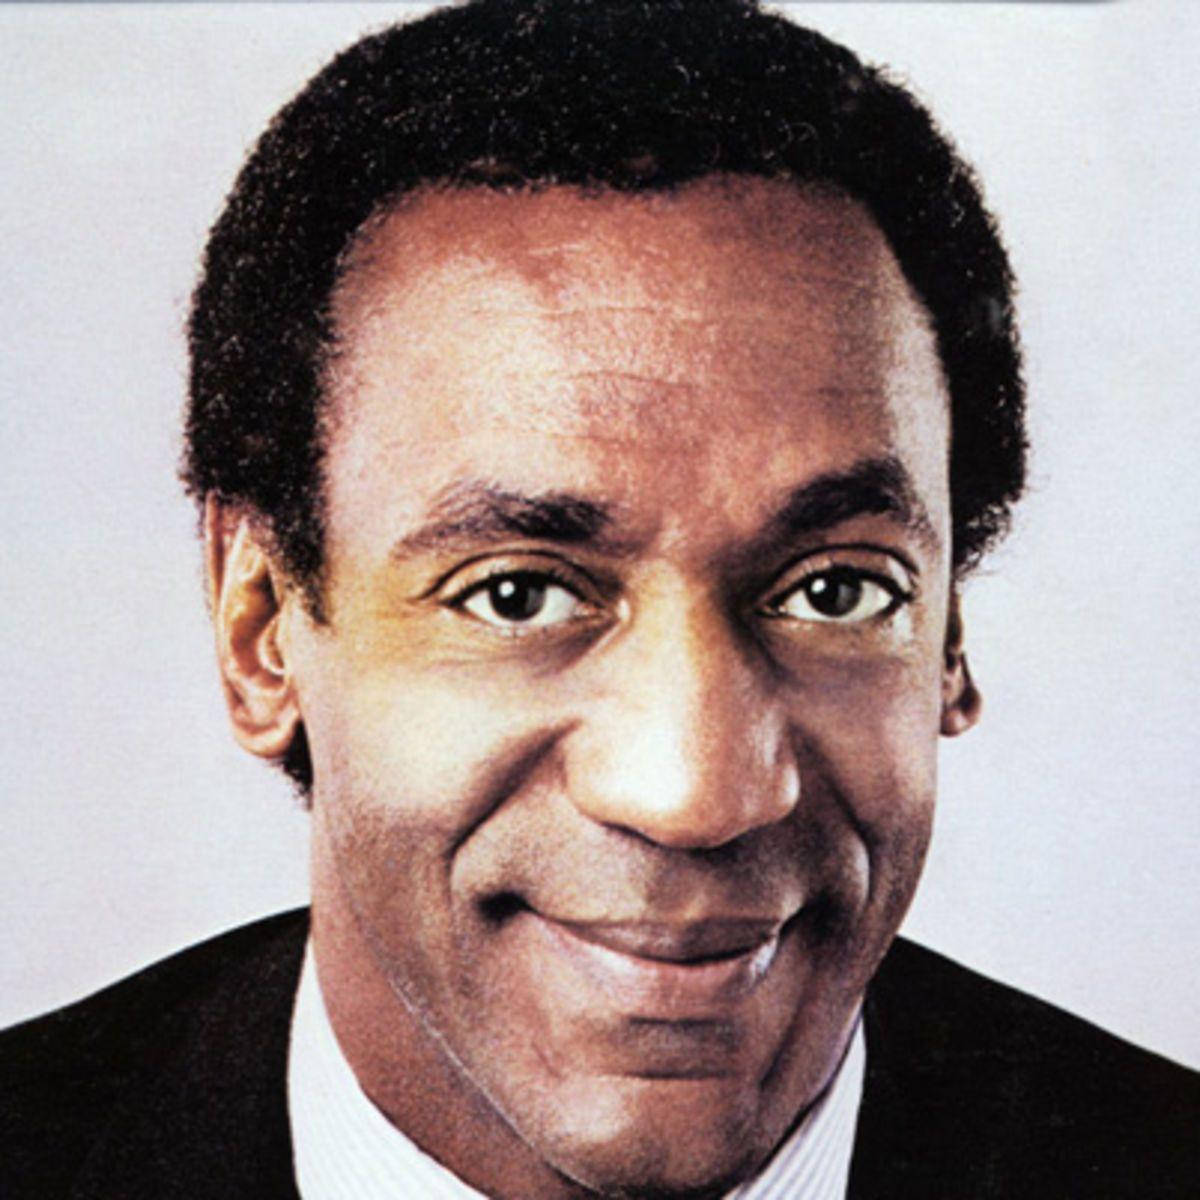 An Energetic Smile From Bill Cosby